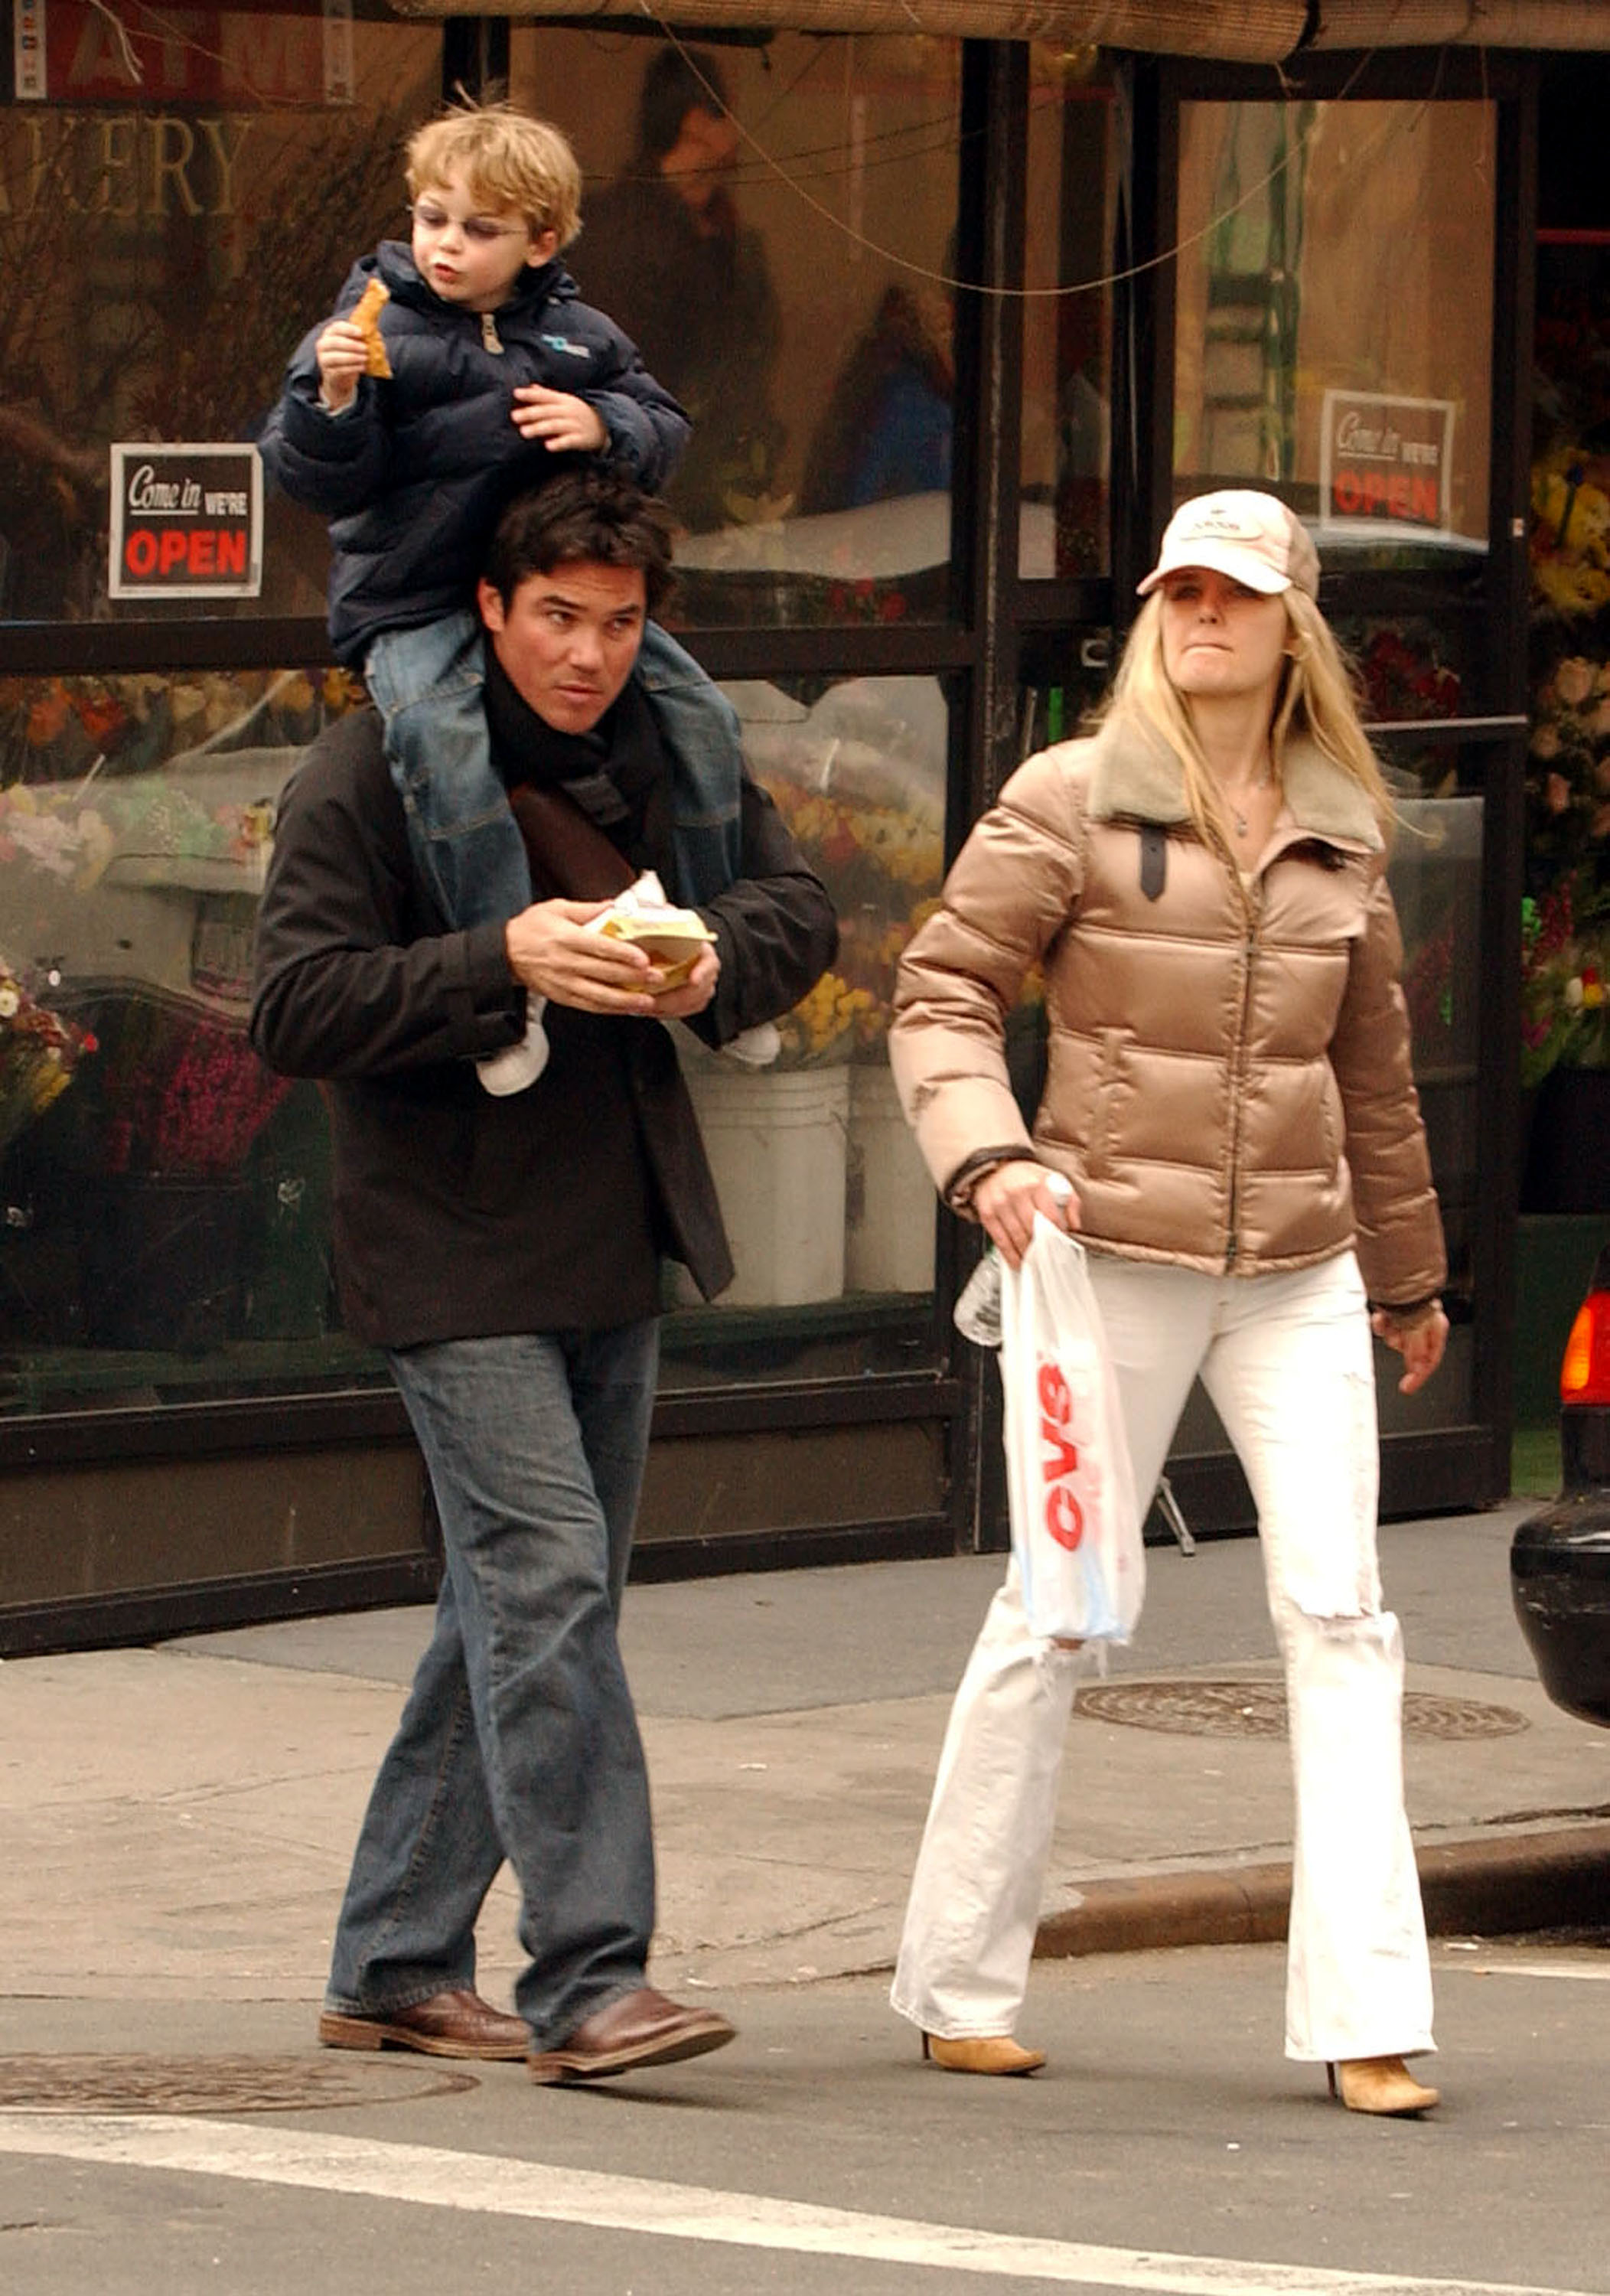 Christopher and Dean Cain with Samantha Torres spotted in New York City on March 17, 2005 | Source: Getty Images